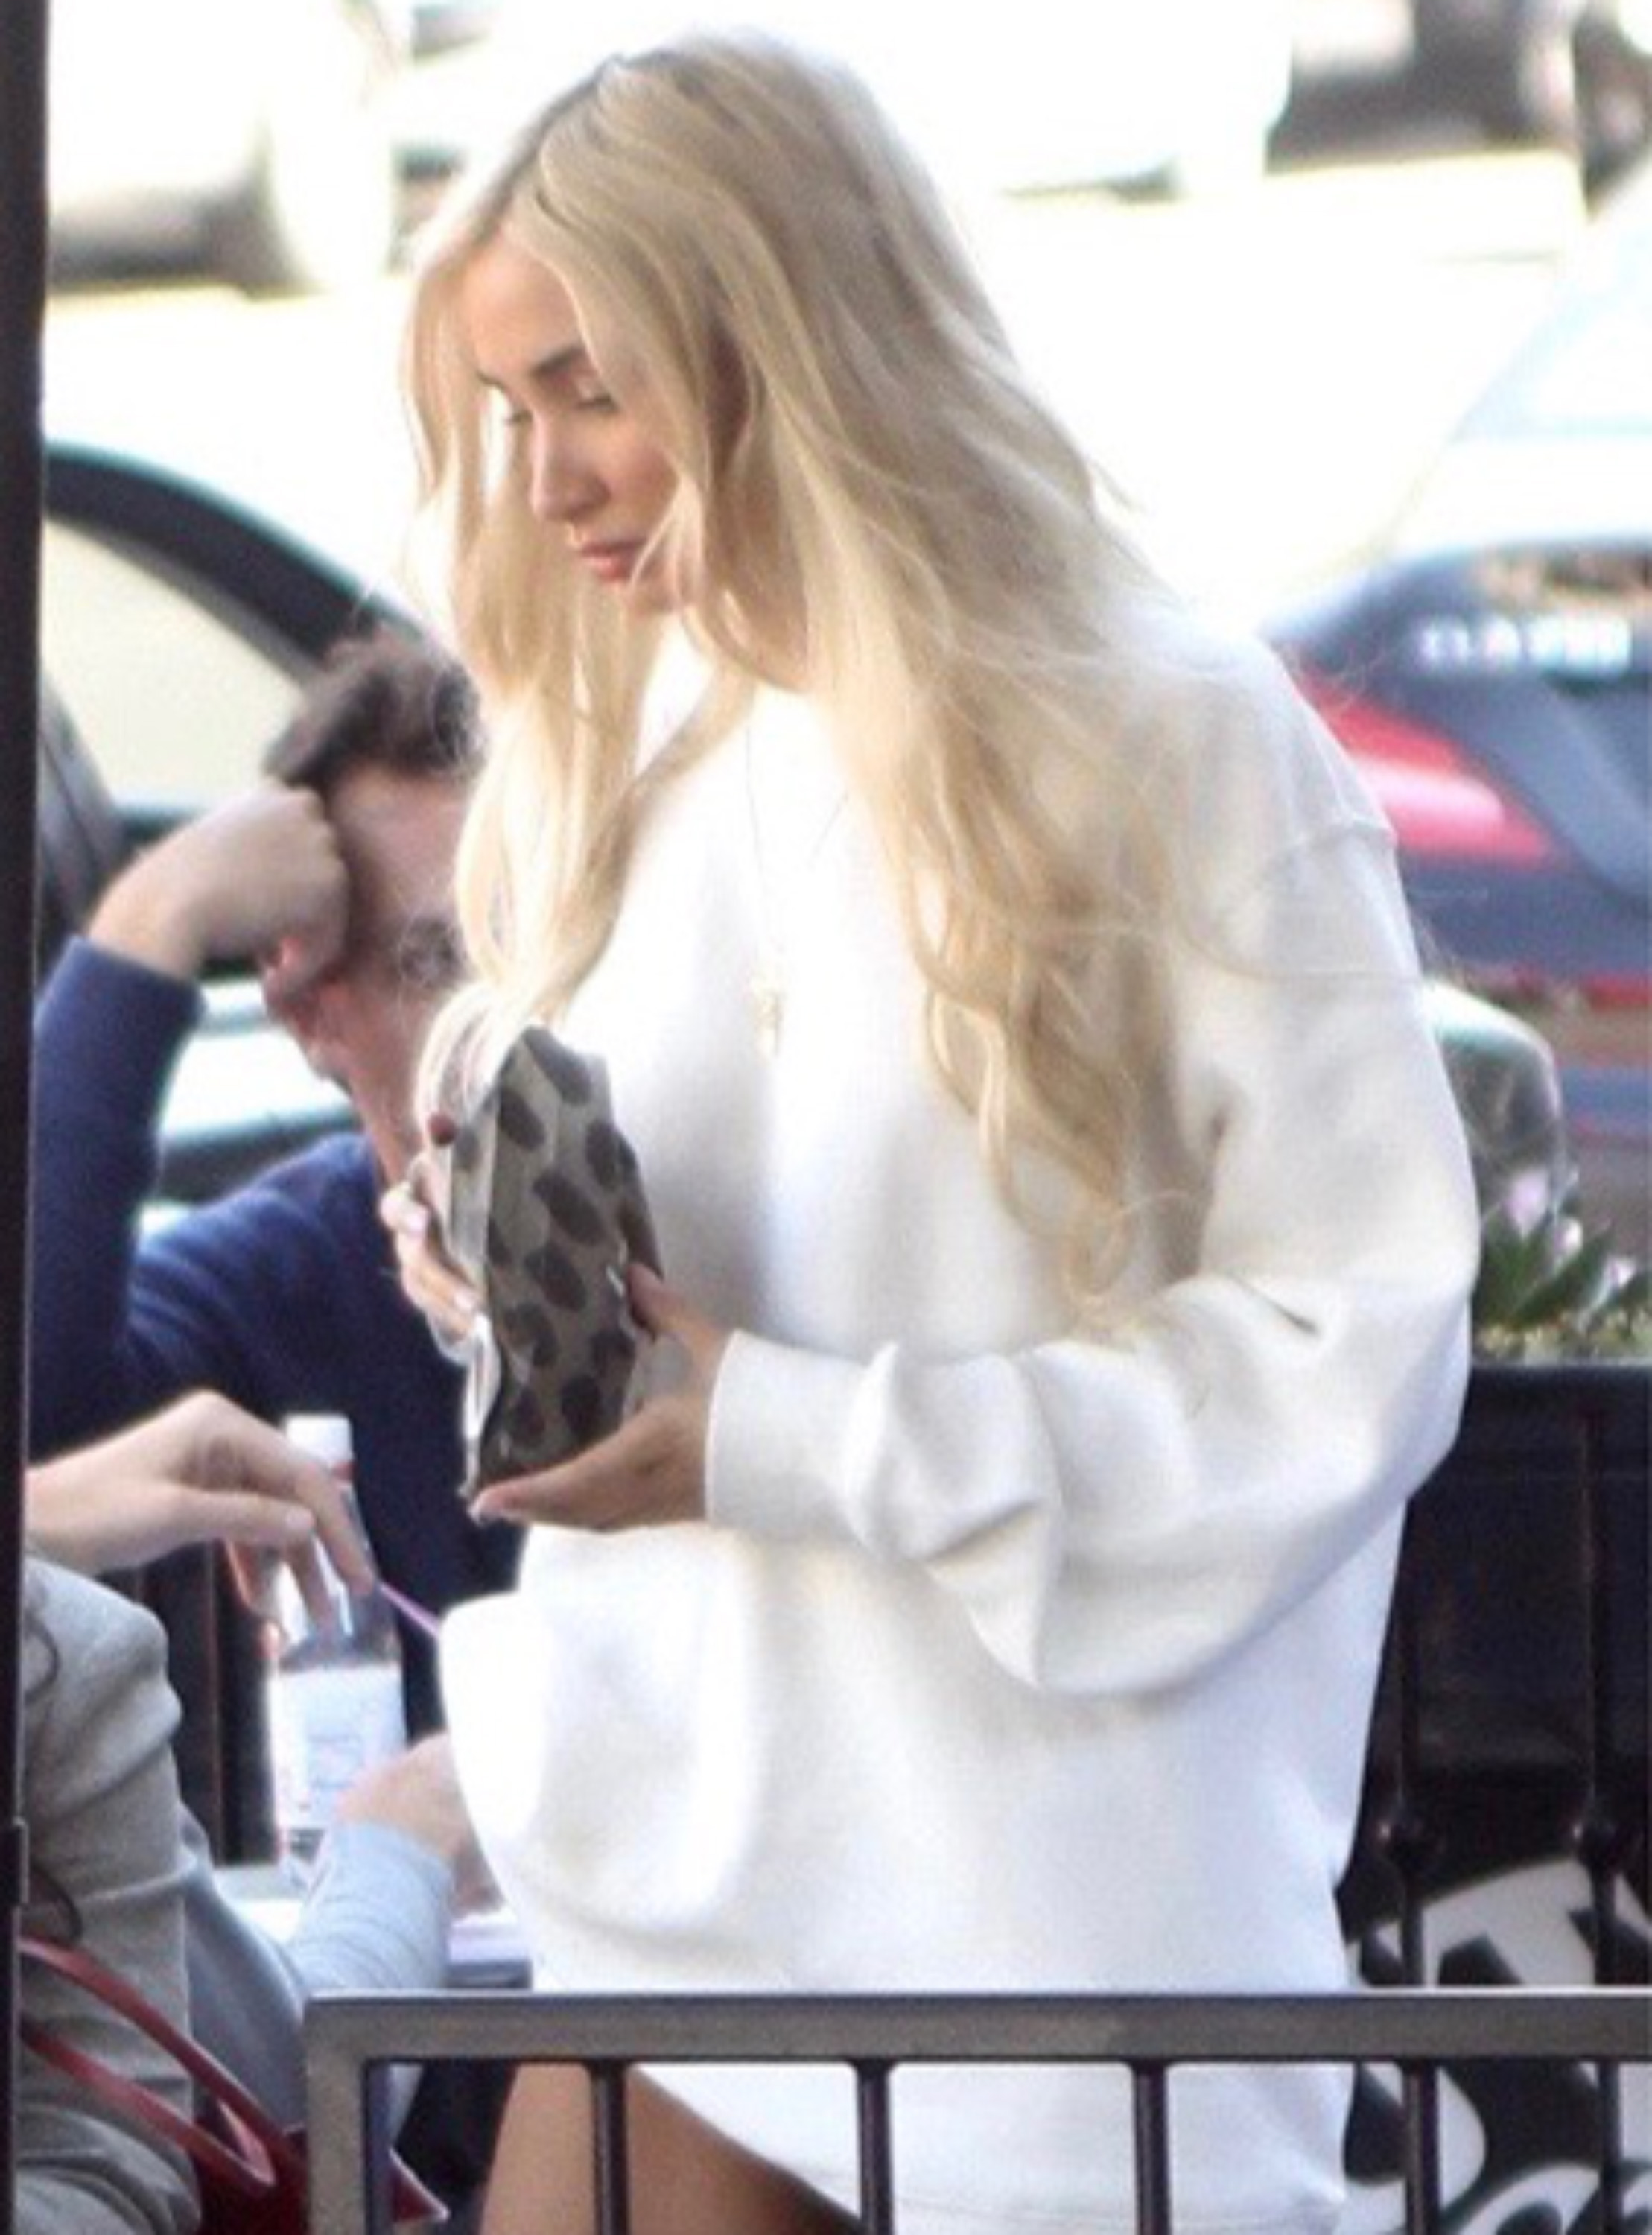 Pia Mia steps out for some shopping